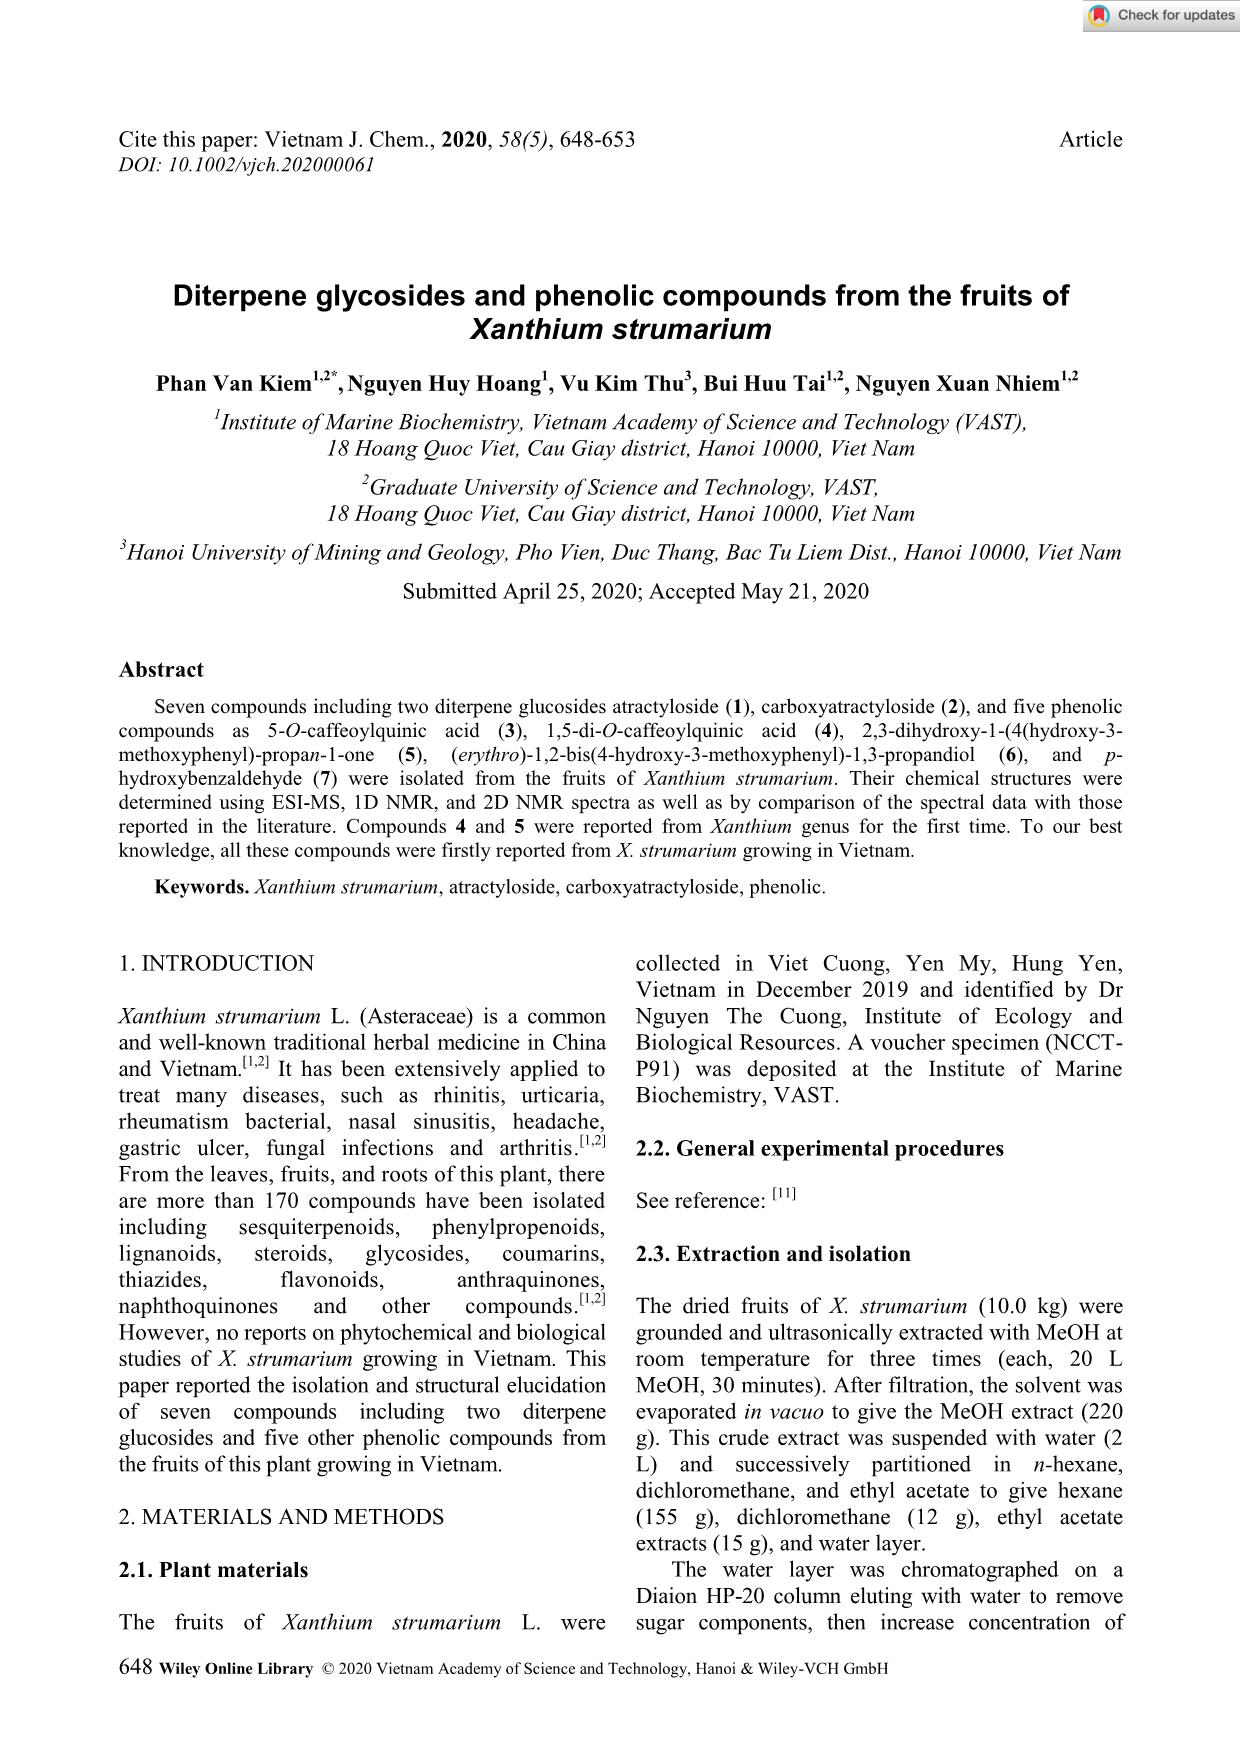 Diterpene glycosides and phenolic compounds from the fruits of Xanthium strumarium trang 1